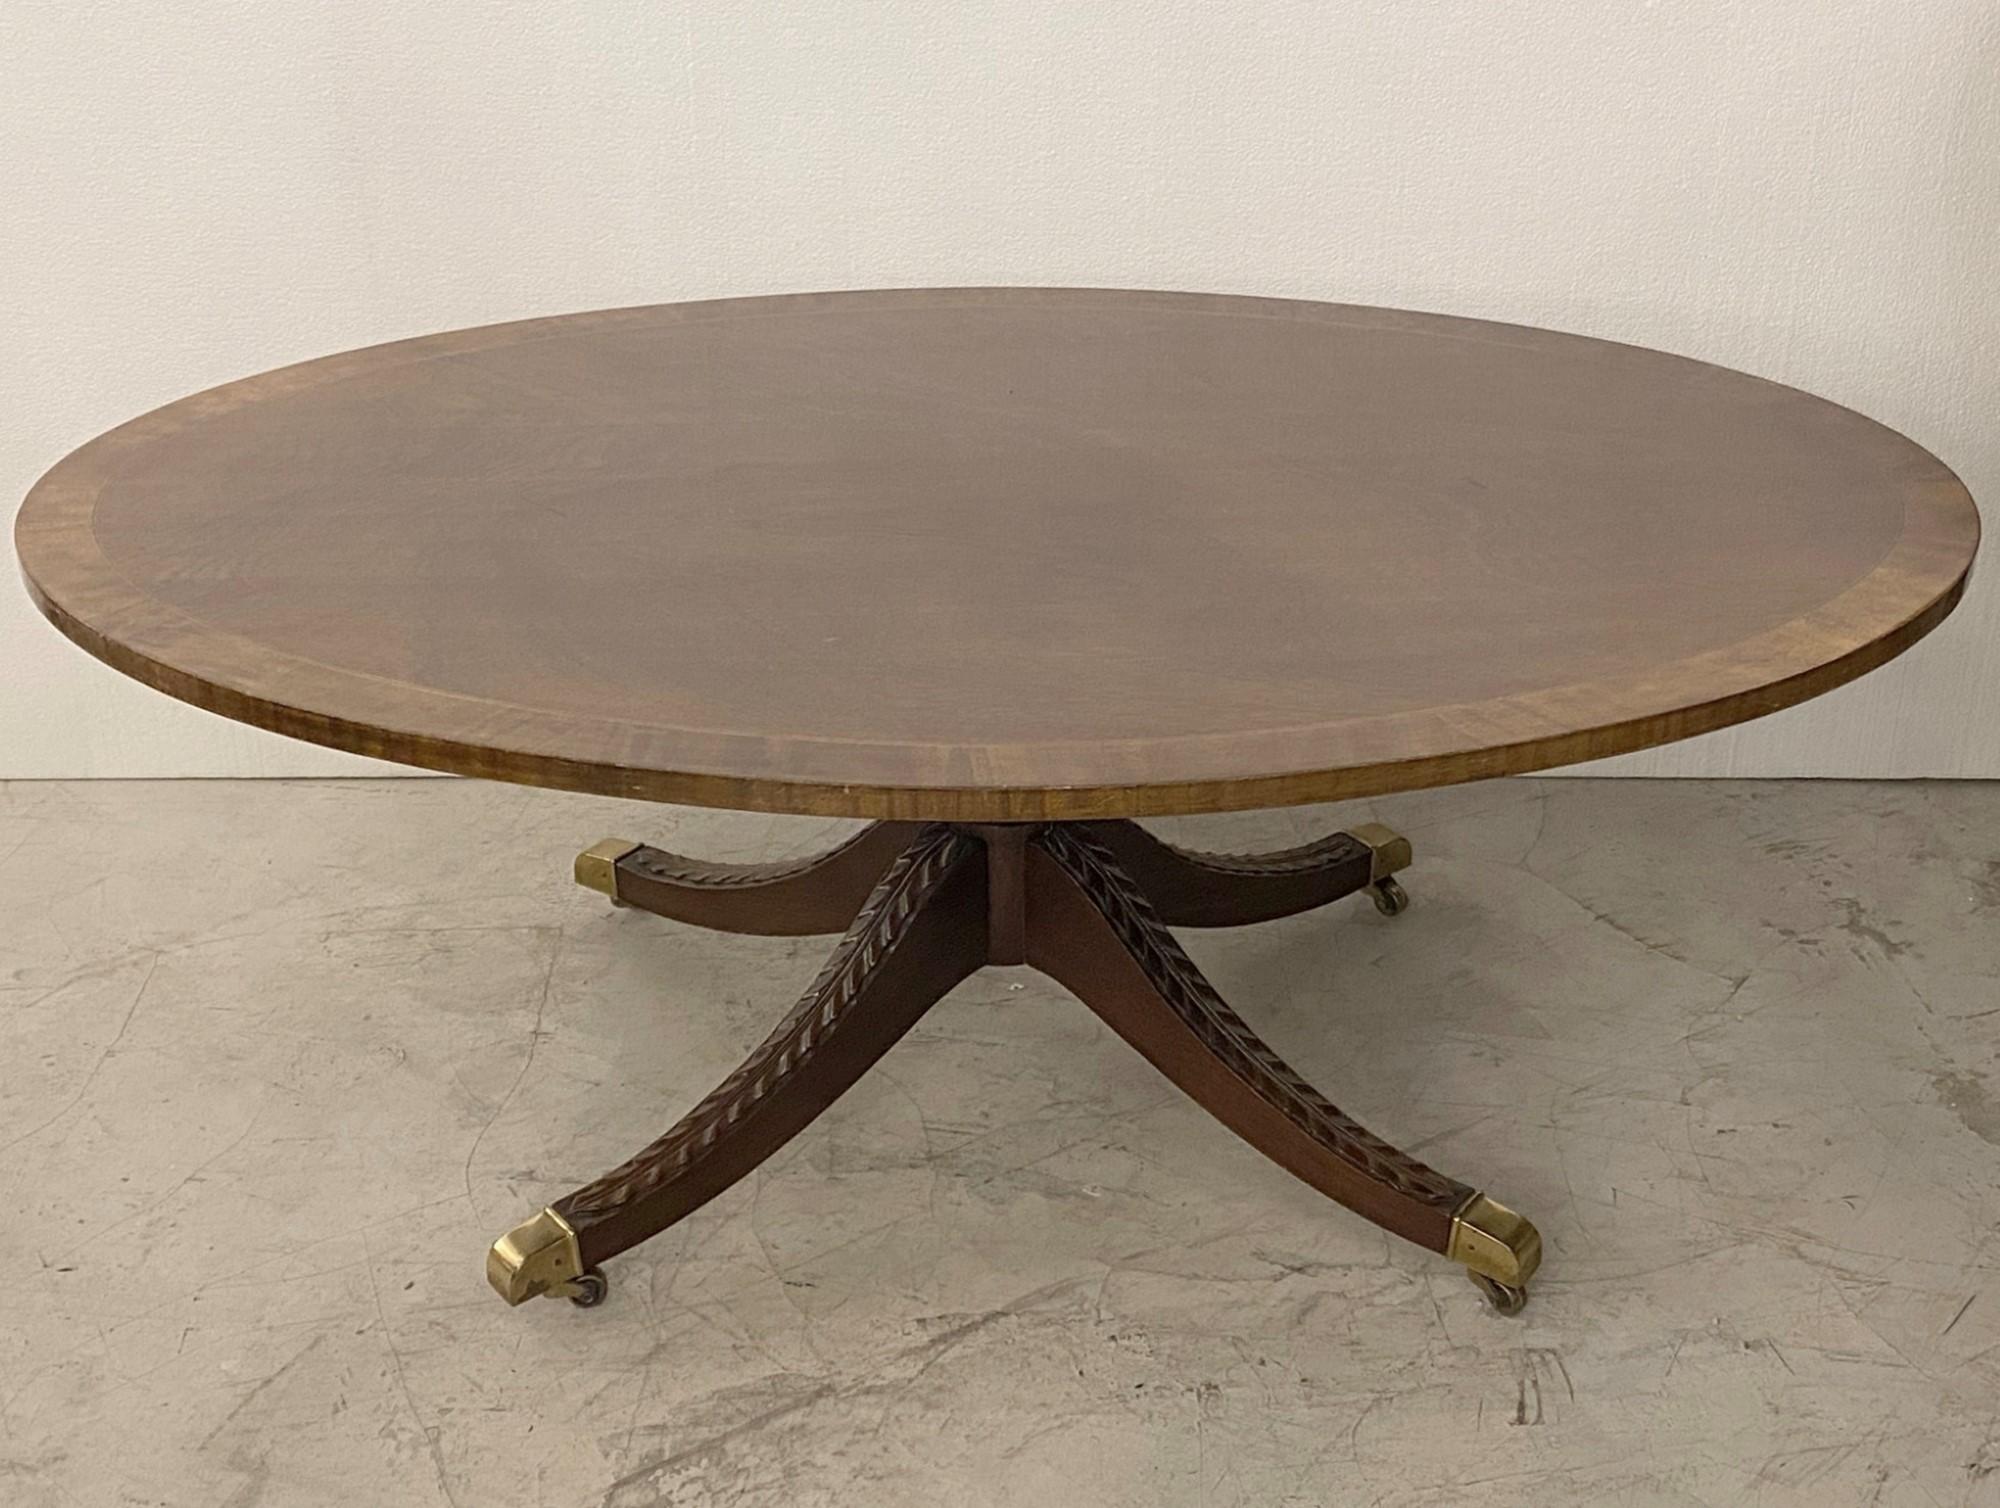 Mid-20th century oval walnut coffee table with inlays. Features floral carving on gently curved legs that are finished with wheeled brass claw feet. Made by Kindel Furniture out of Grand Rapids, MI. This can be seen at our 2420 Broadway location on